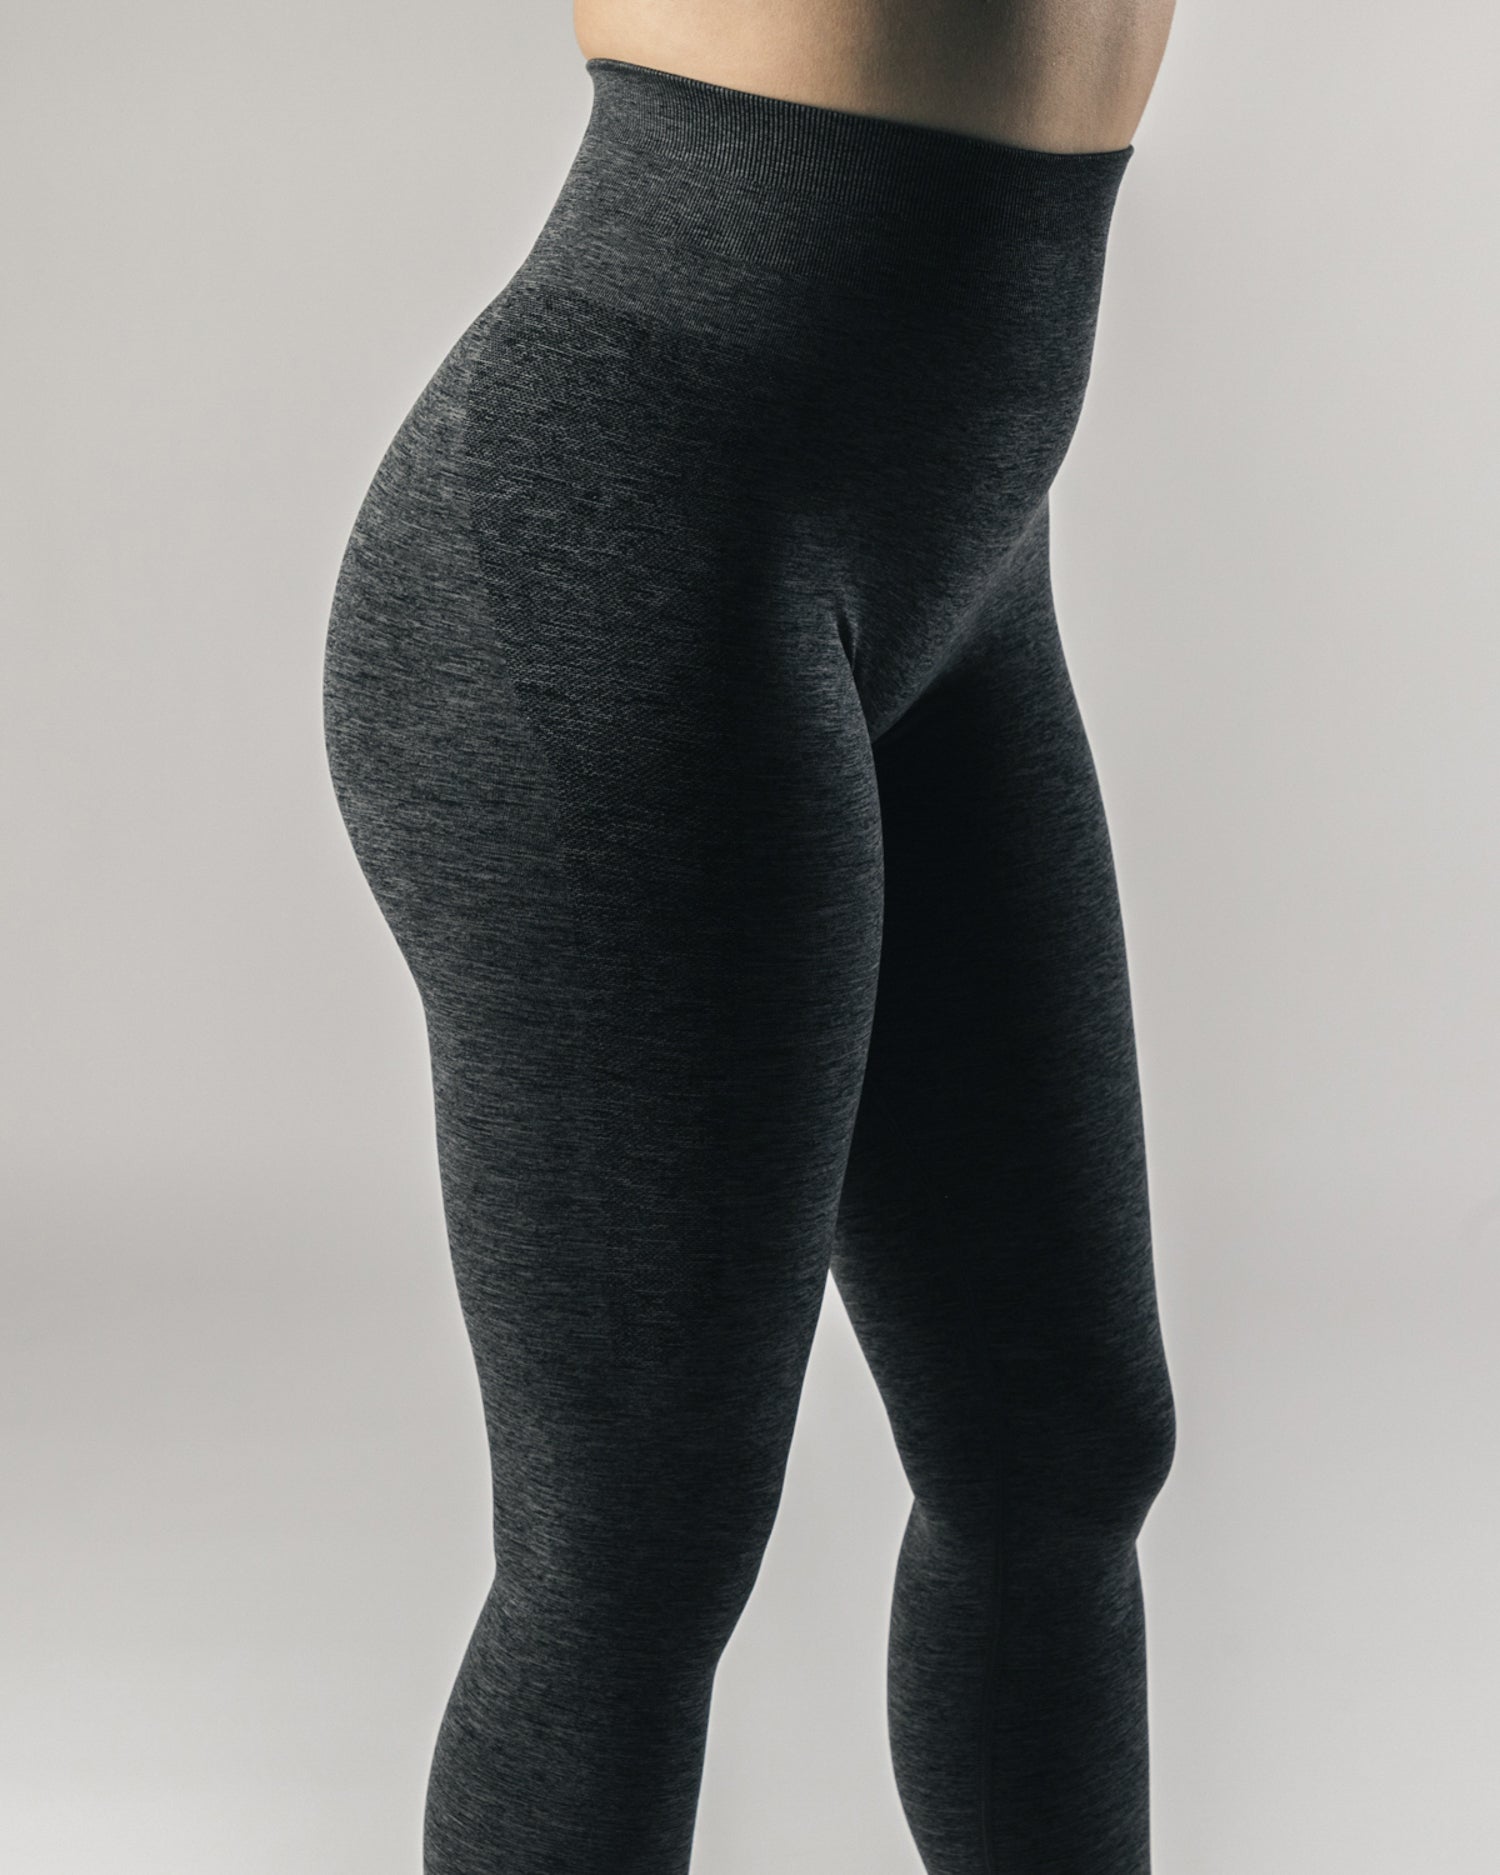 Alphalete Amplify Leggings Review Redditlist  International Society of  Precision Agriculture